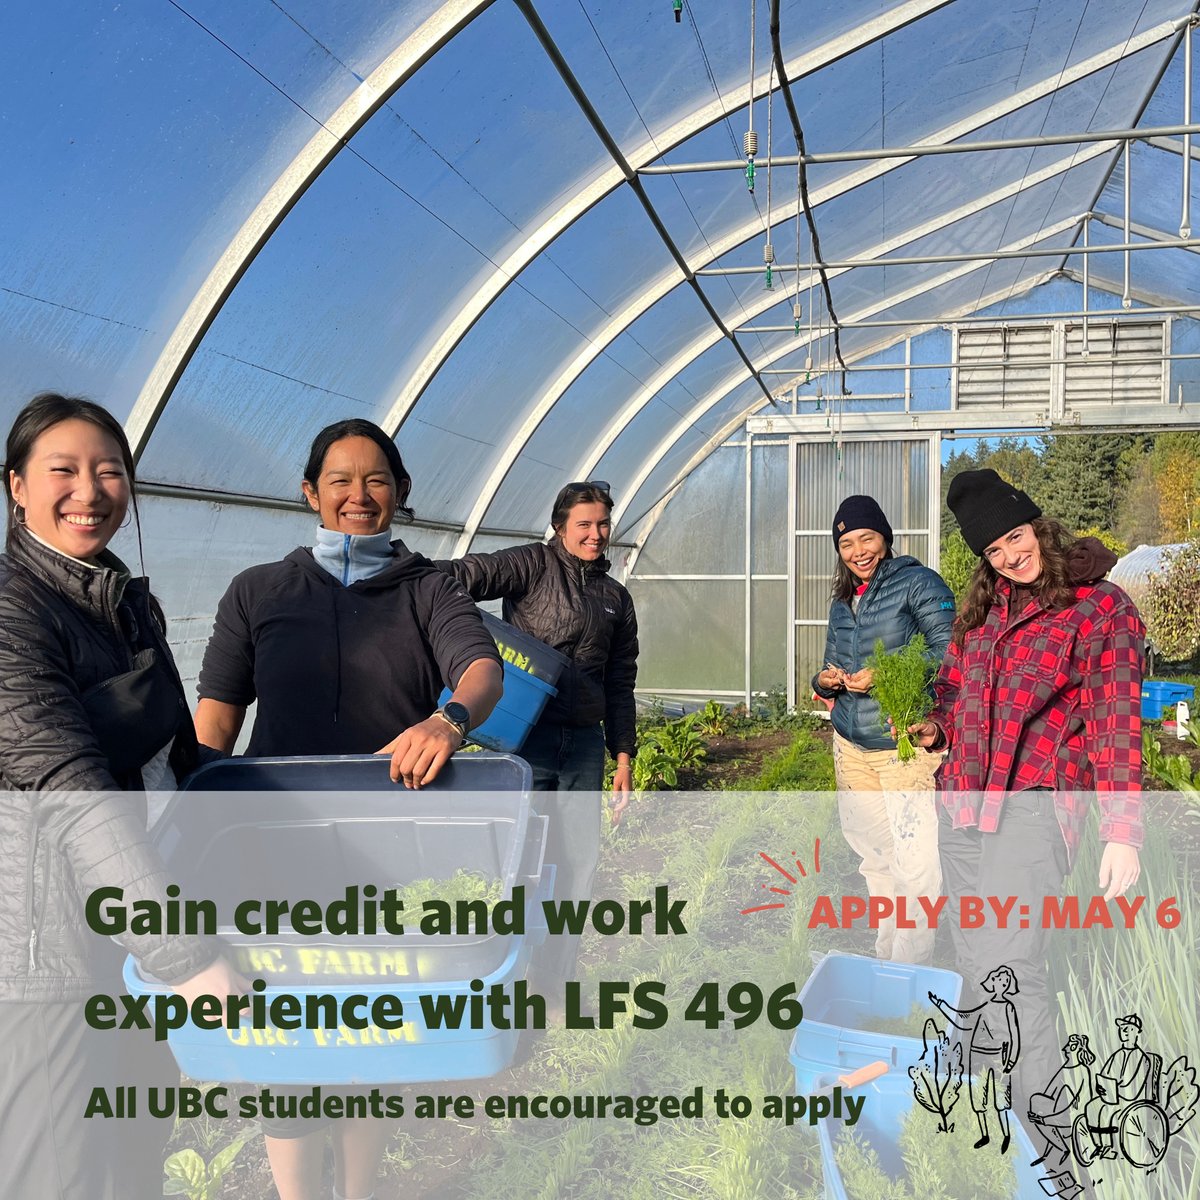 Apply for LFS 496 career development positions today! LFS 496 prepares UBC students professionally and academically for future careers through a mentored learning experience with a real food business or organization Deadline to apply: Monday, May 6. ubcfarm.ubc.ca/learn/lfs496/